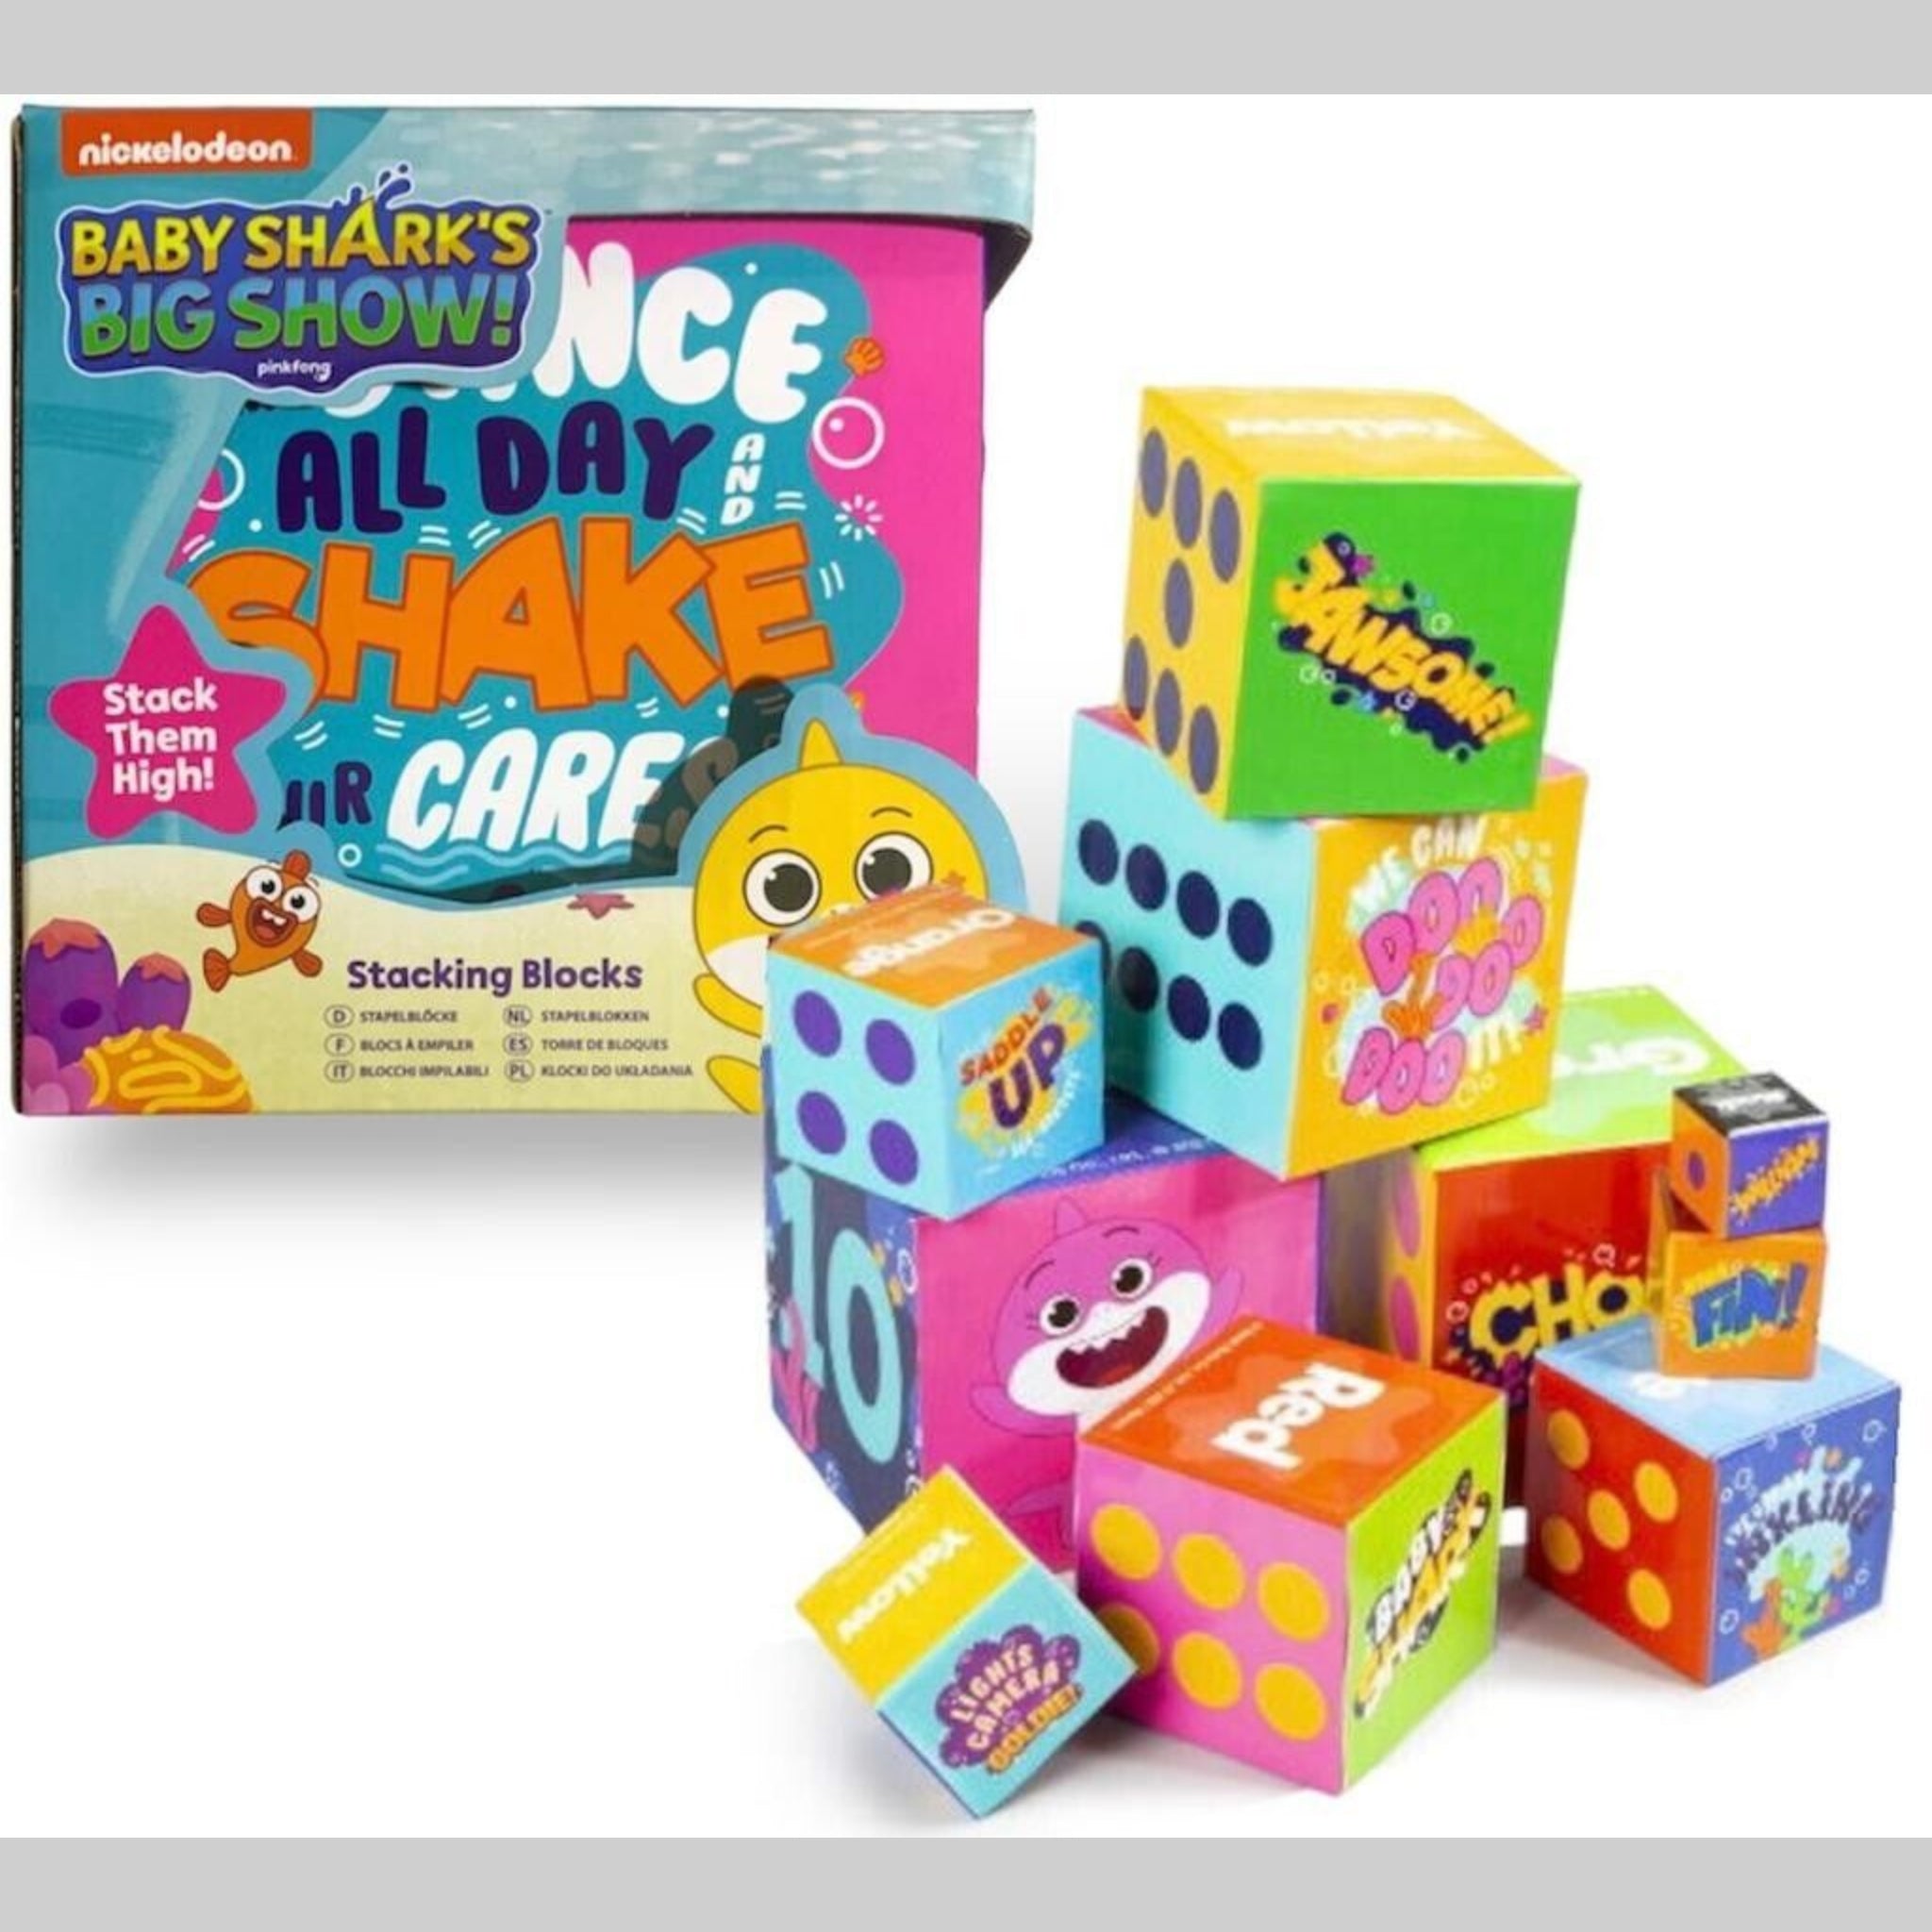 Beclen Harp Official Baby Shark's Big Show Stacking Numbered Blocks/Cubes For Kids/Toddlers-Perfect Fun And Educational Toy Gift Set For Christmas/Xmas